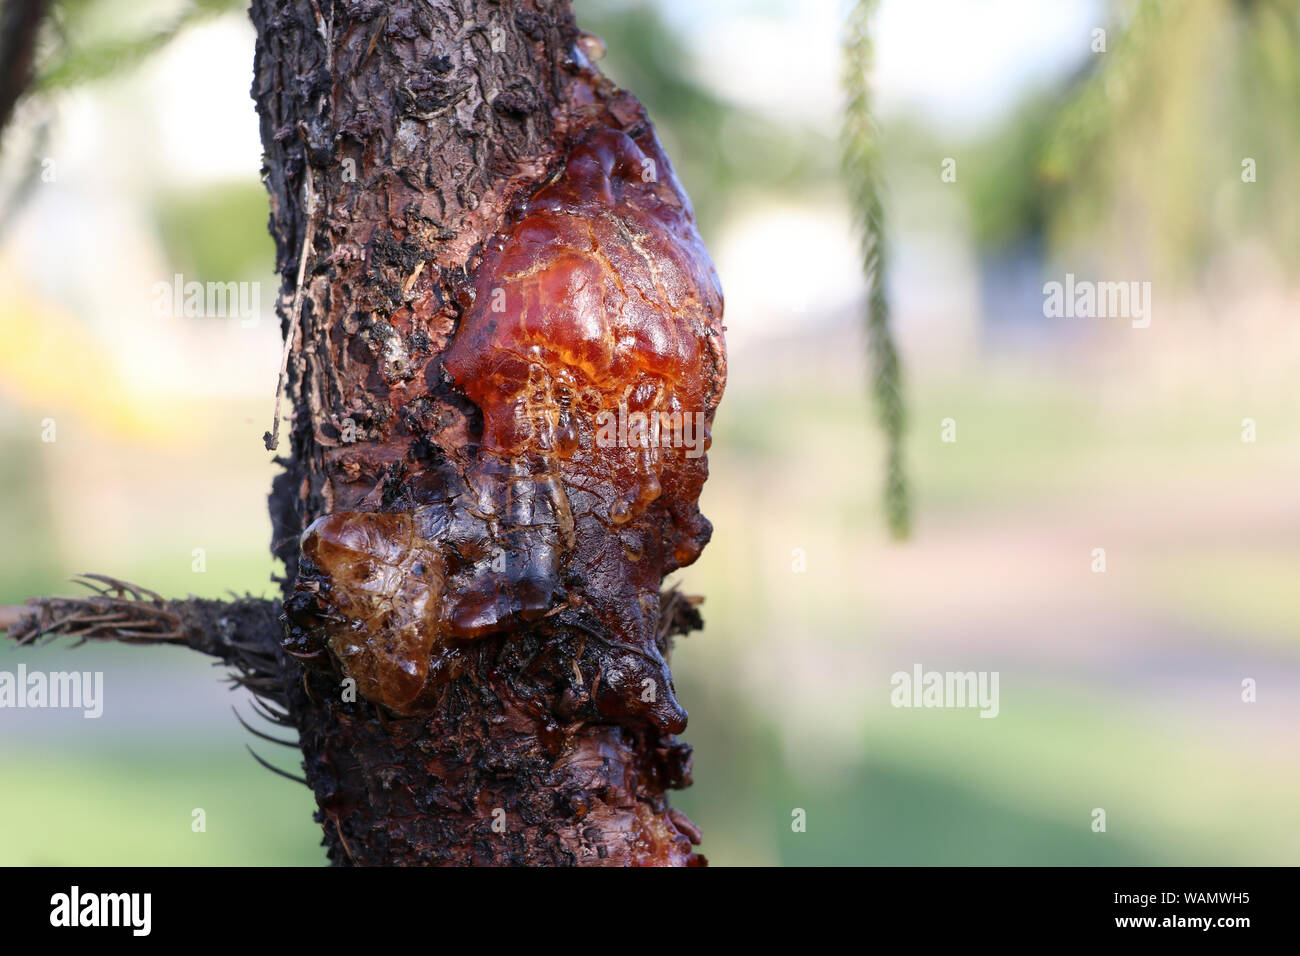 The resin of pine trees flows from the wound on the side of the trunk. The amber liquid that flows from the pine tree. Stock Photo